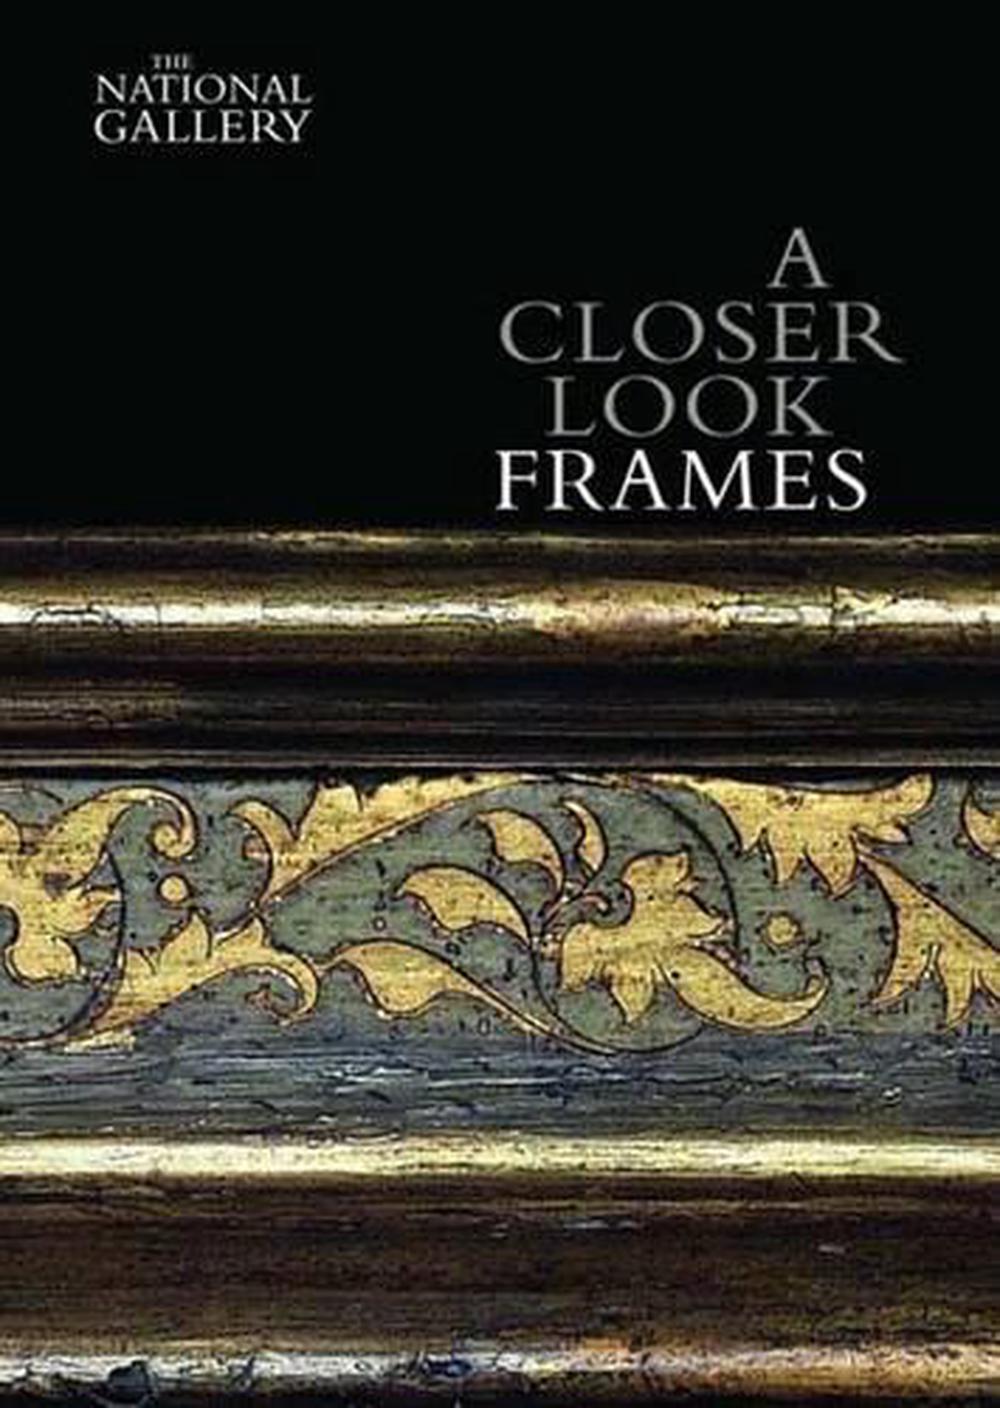 A Closer Look: Frames by Nicholas Penny, Paperback, 9781857094404 | Buy